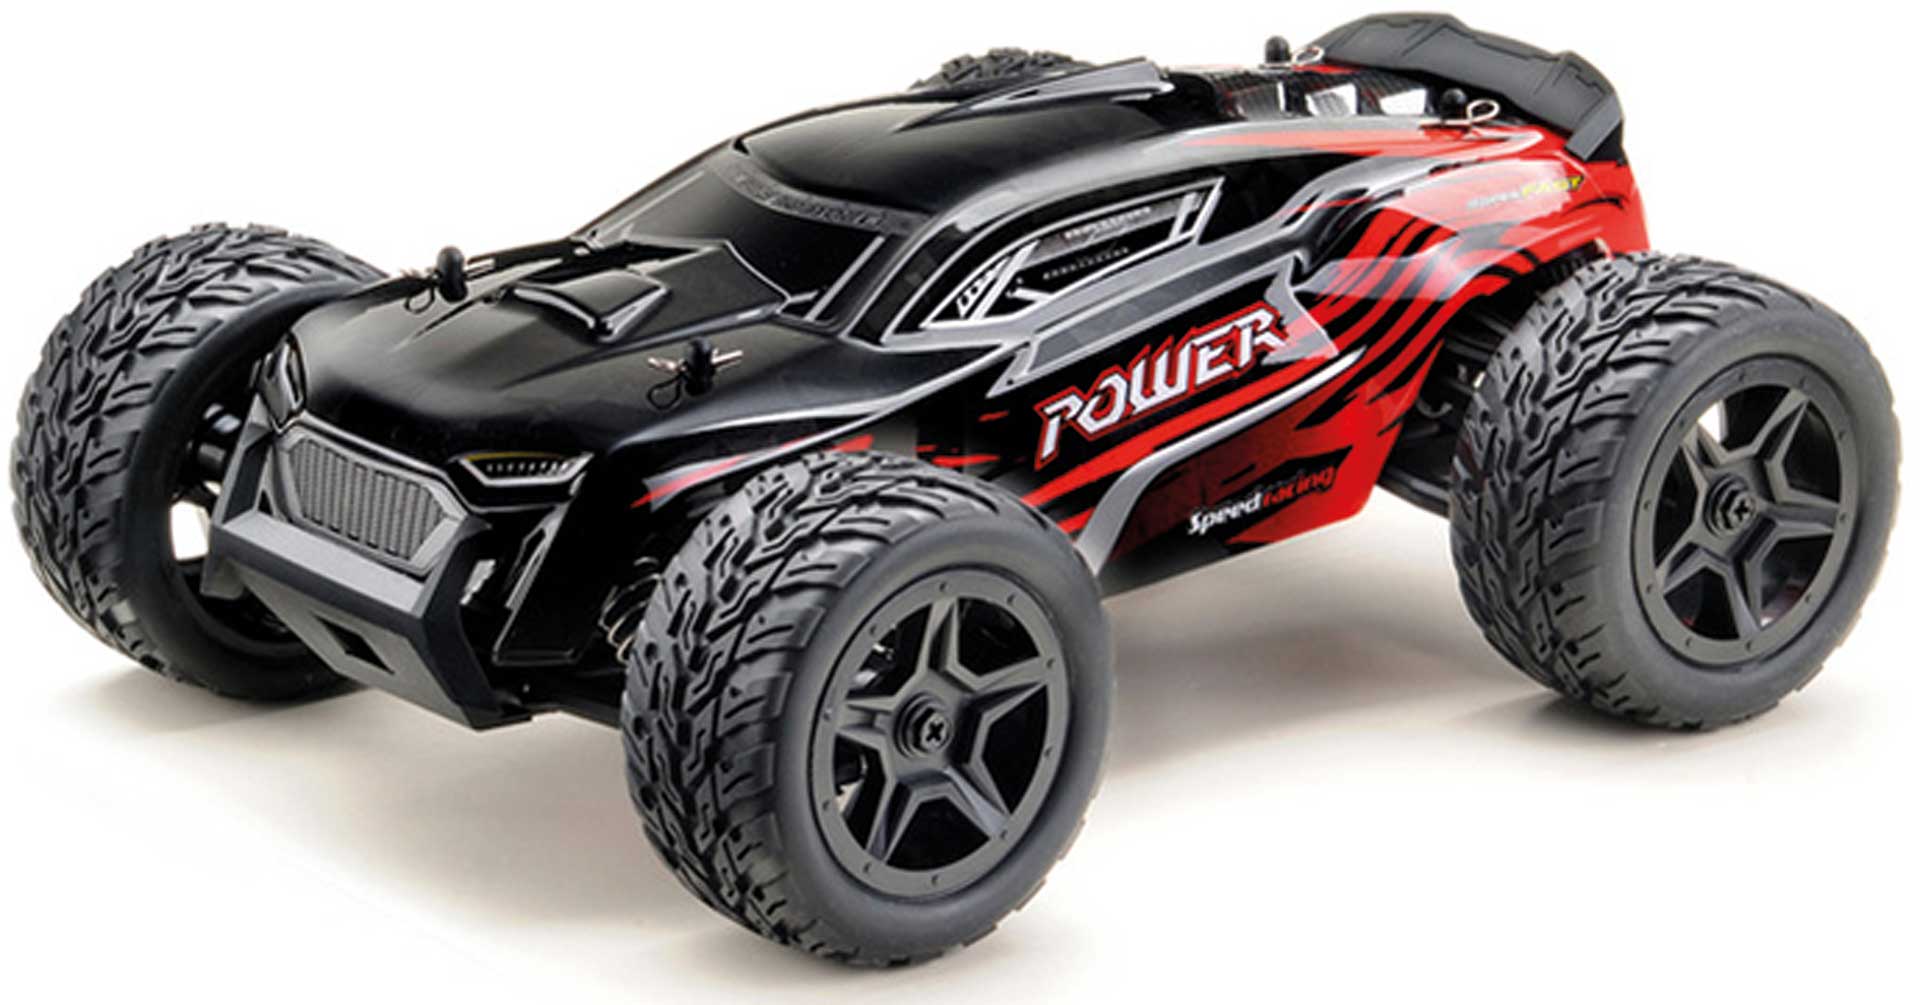 ABSIMA 1:14 High-Speed Truggy "POWER" 4WD RTR